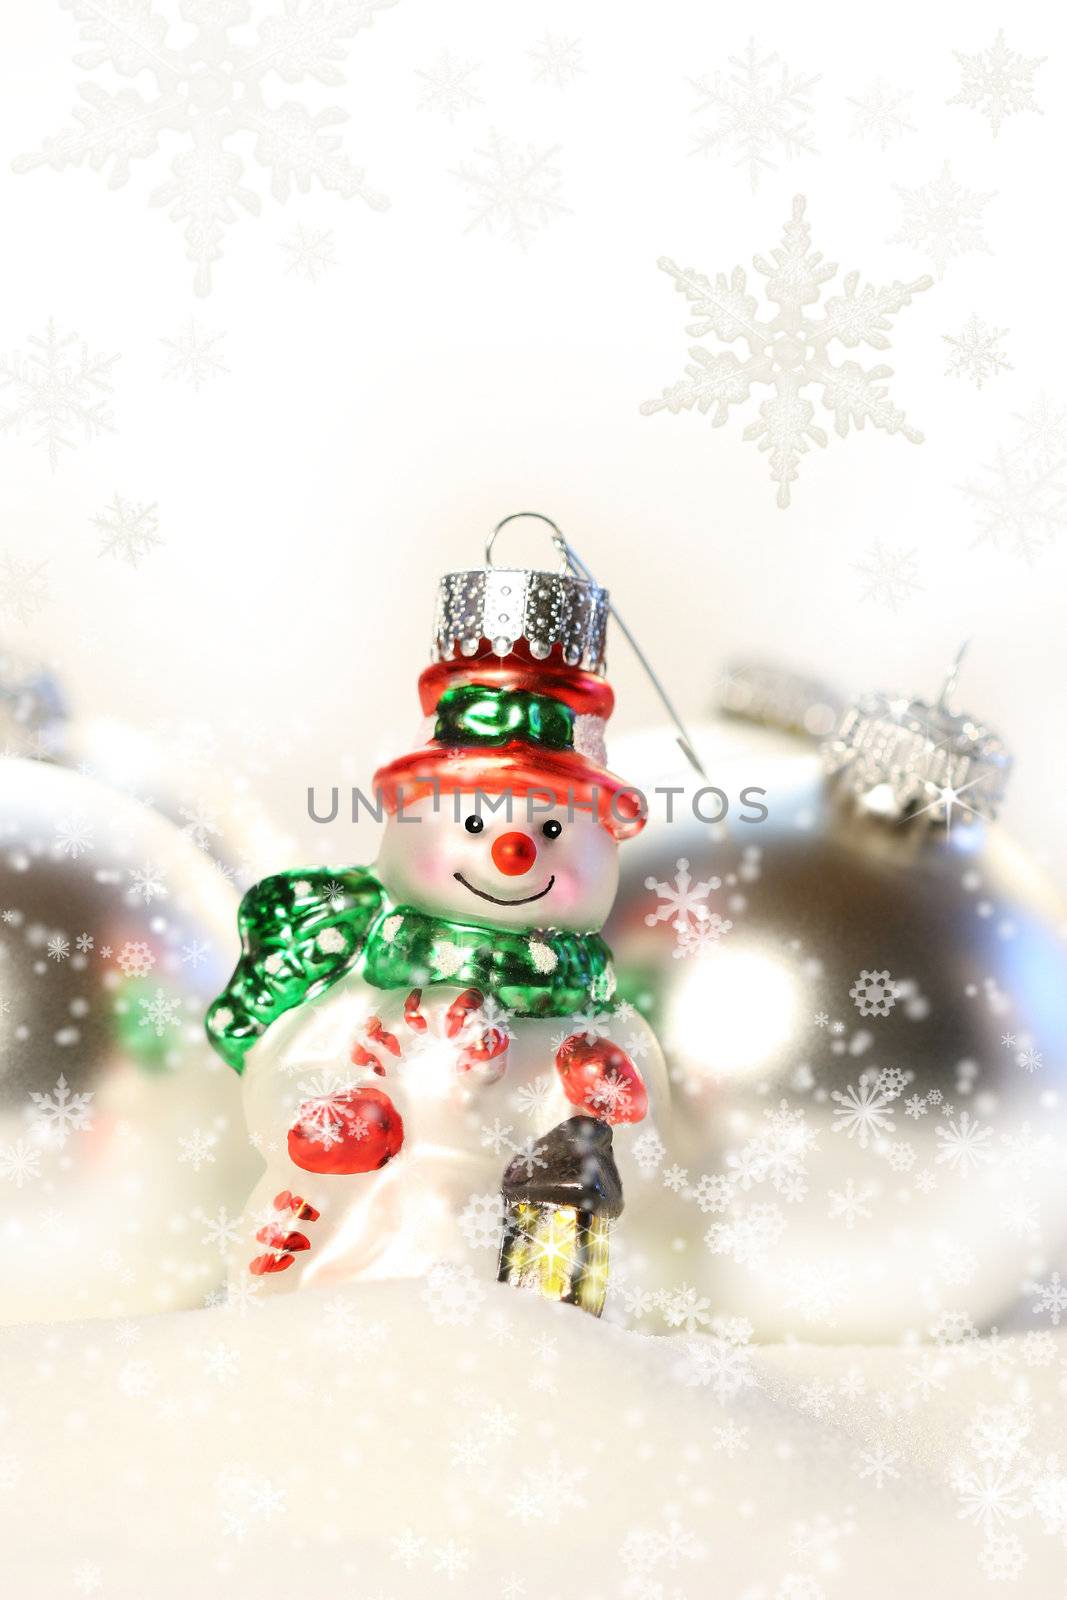 Little snowman ornament in the snow by Sandralise